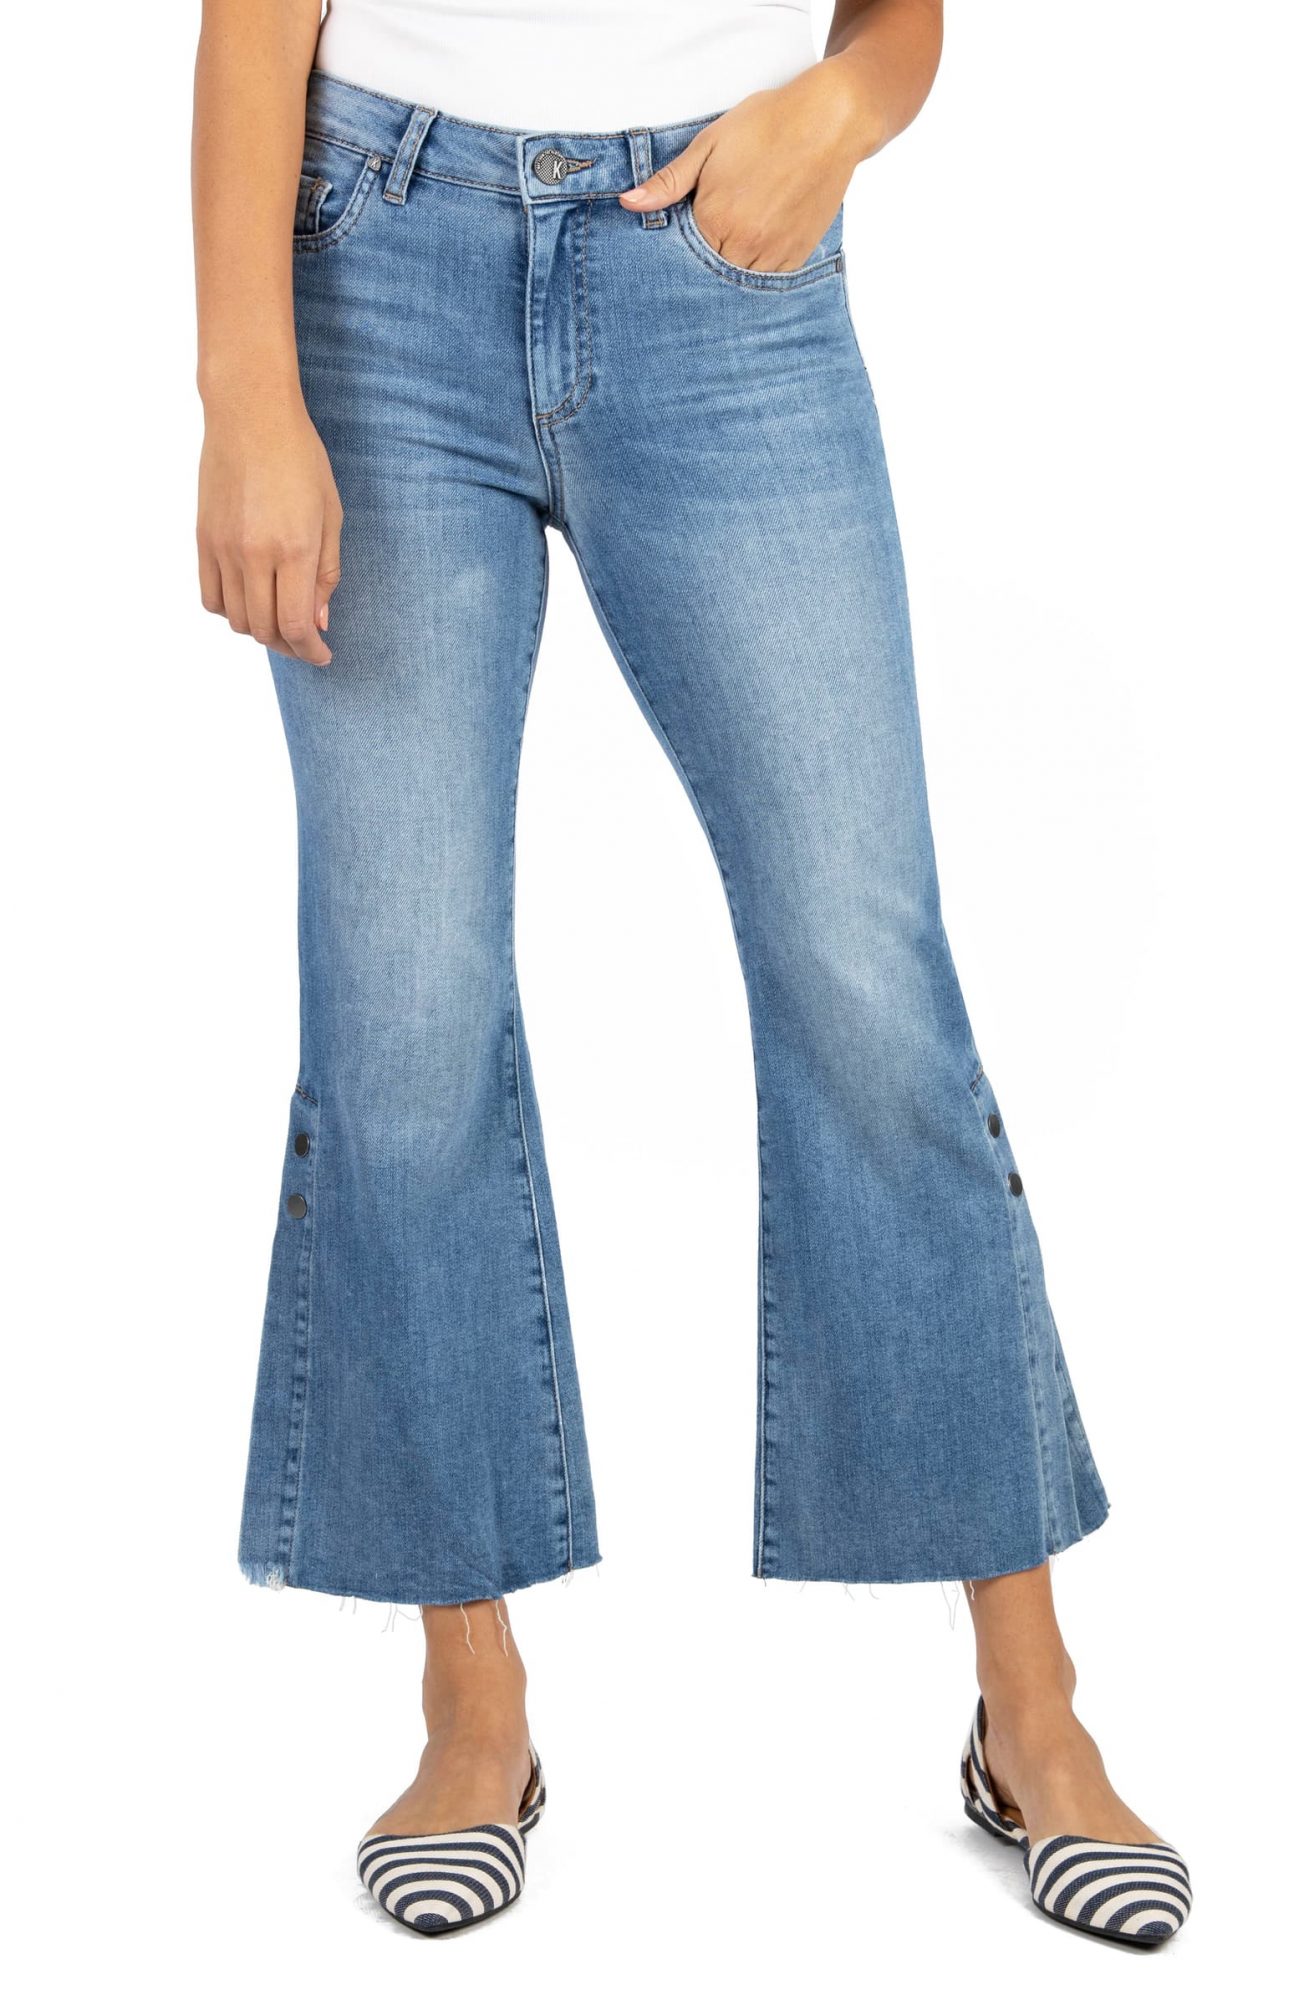 nordstrom flare jeans, best jeans for each zodiac sign